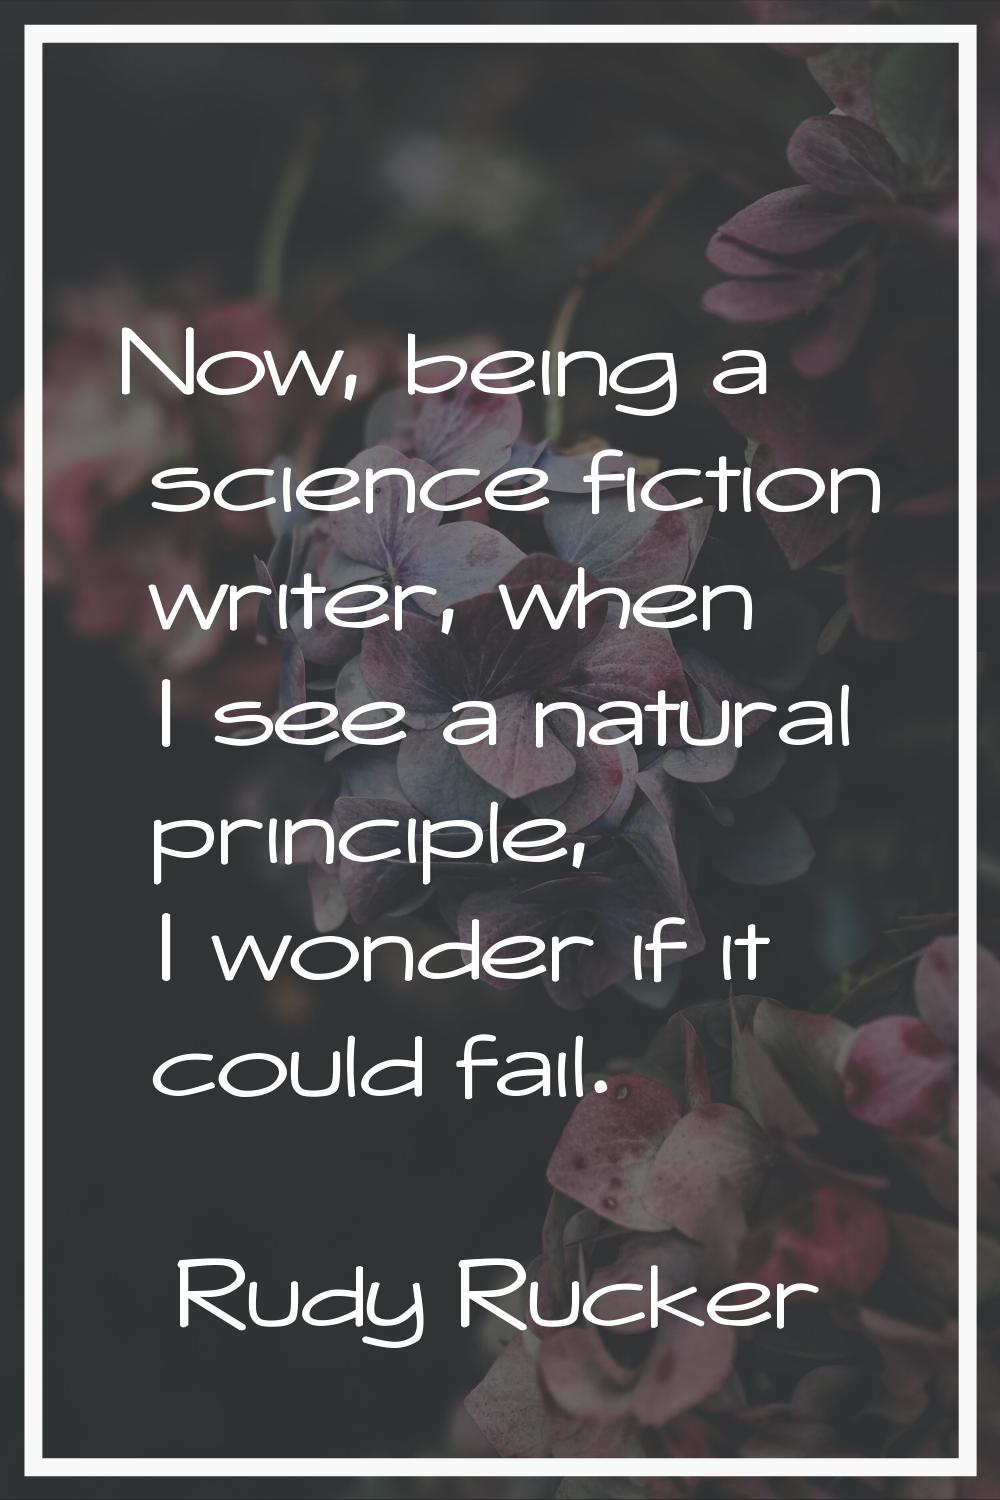 Now, being a science fiction writer, when I see a natural principle, I wonder if it could fail.